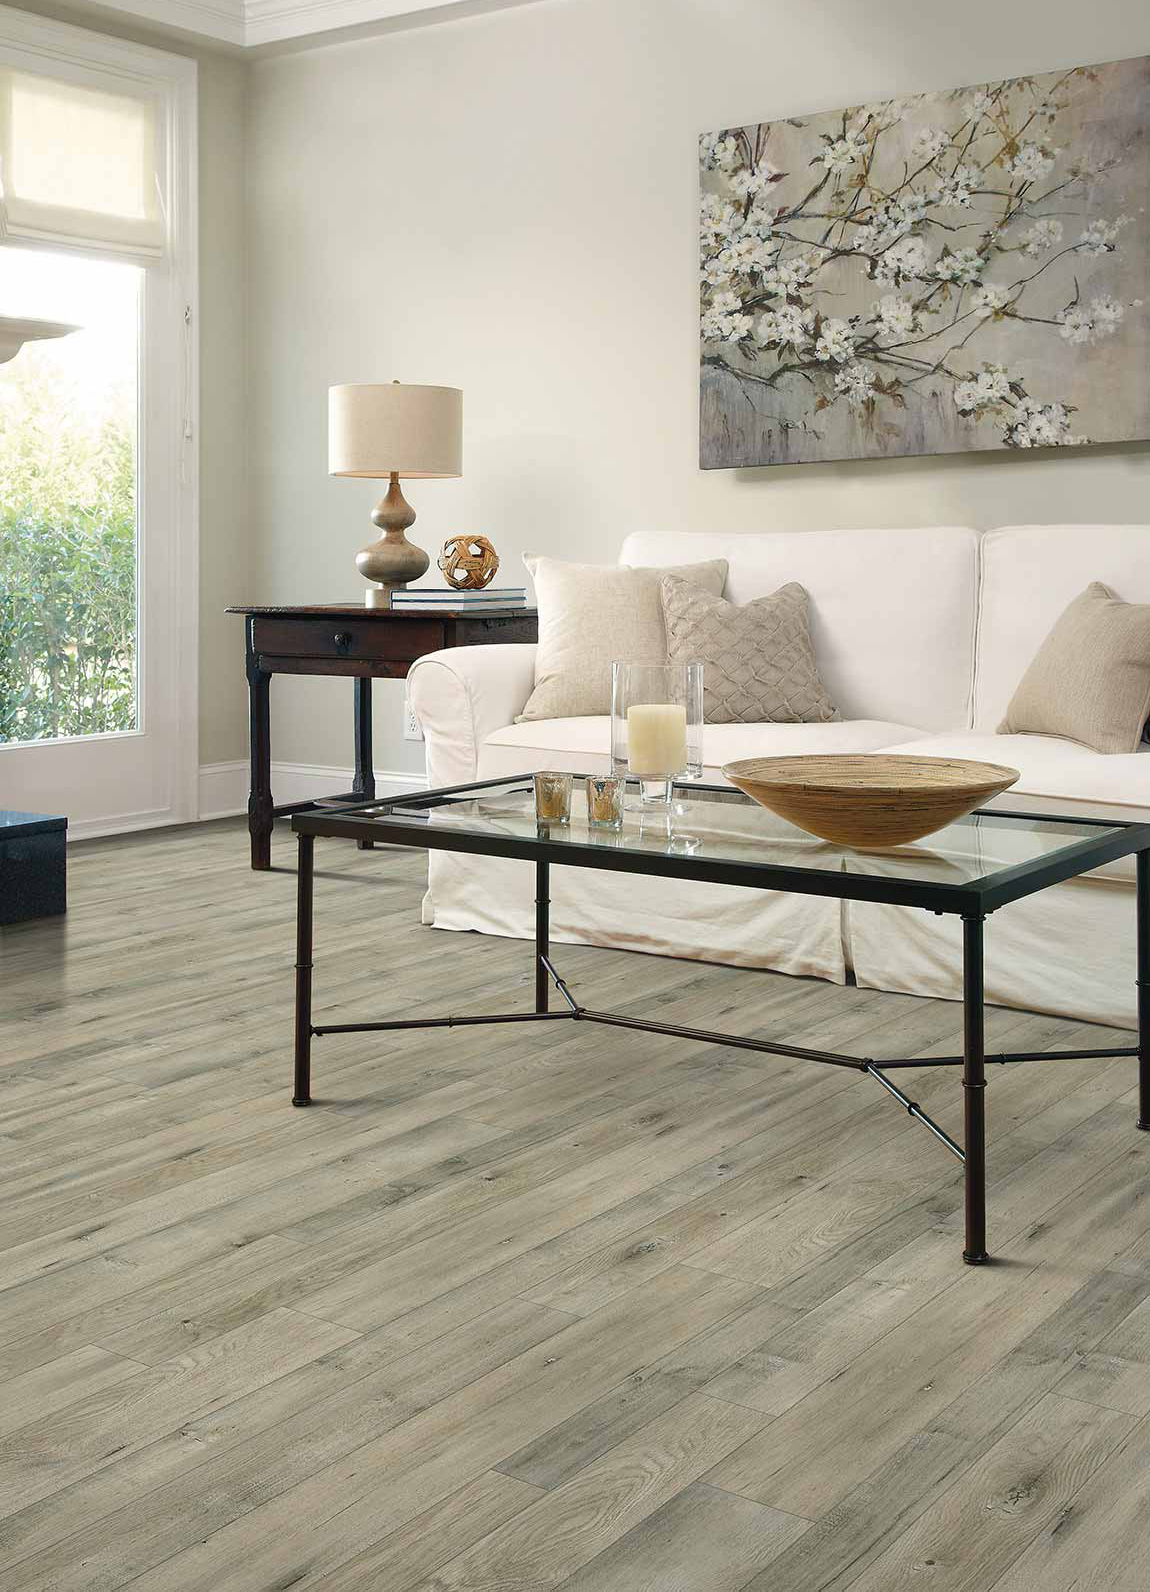 Floorcraft Laminate Majestic Pear, laminate in living room scene with glass coffee table, white couch and wall art.